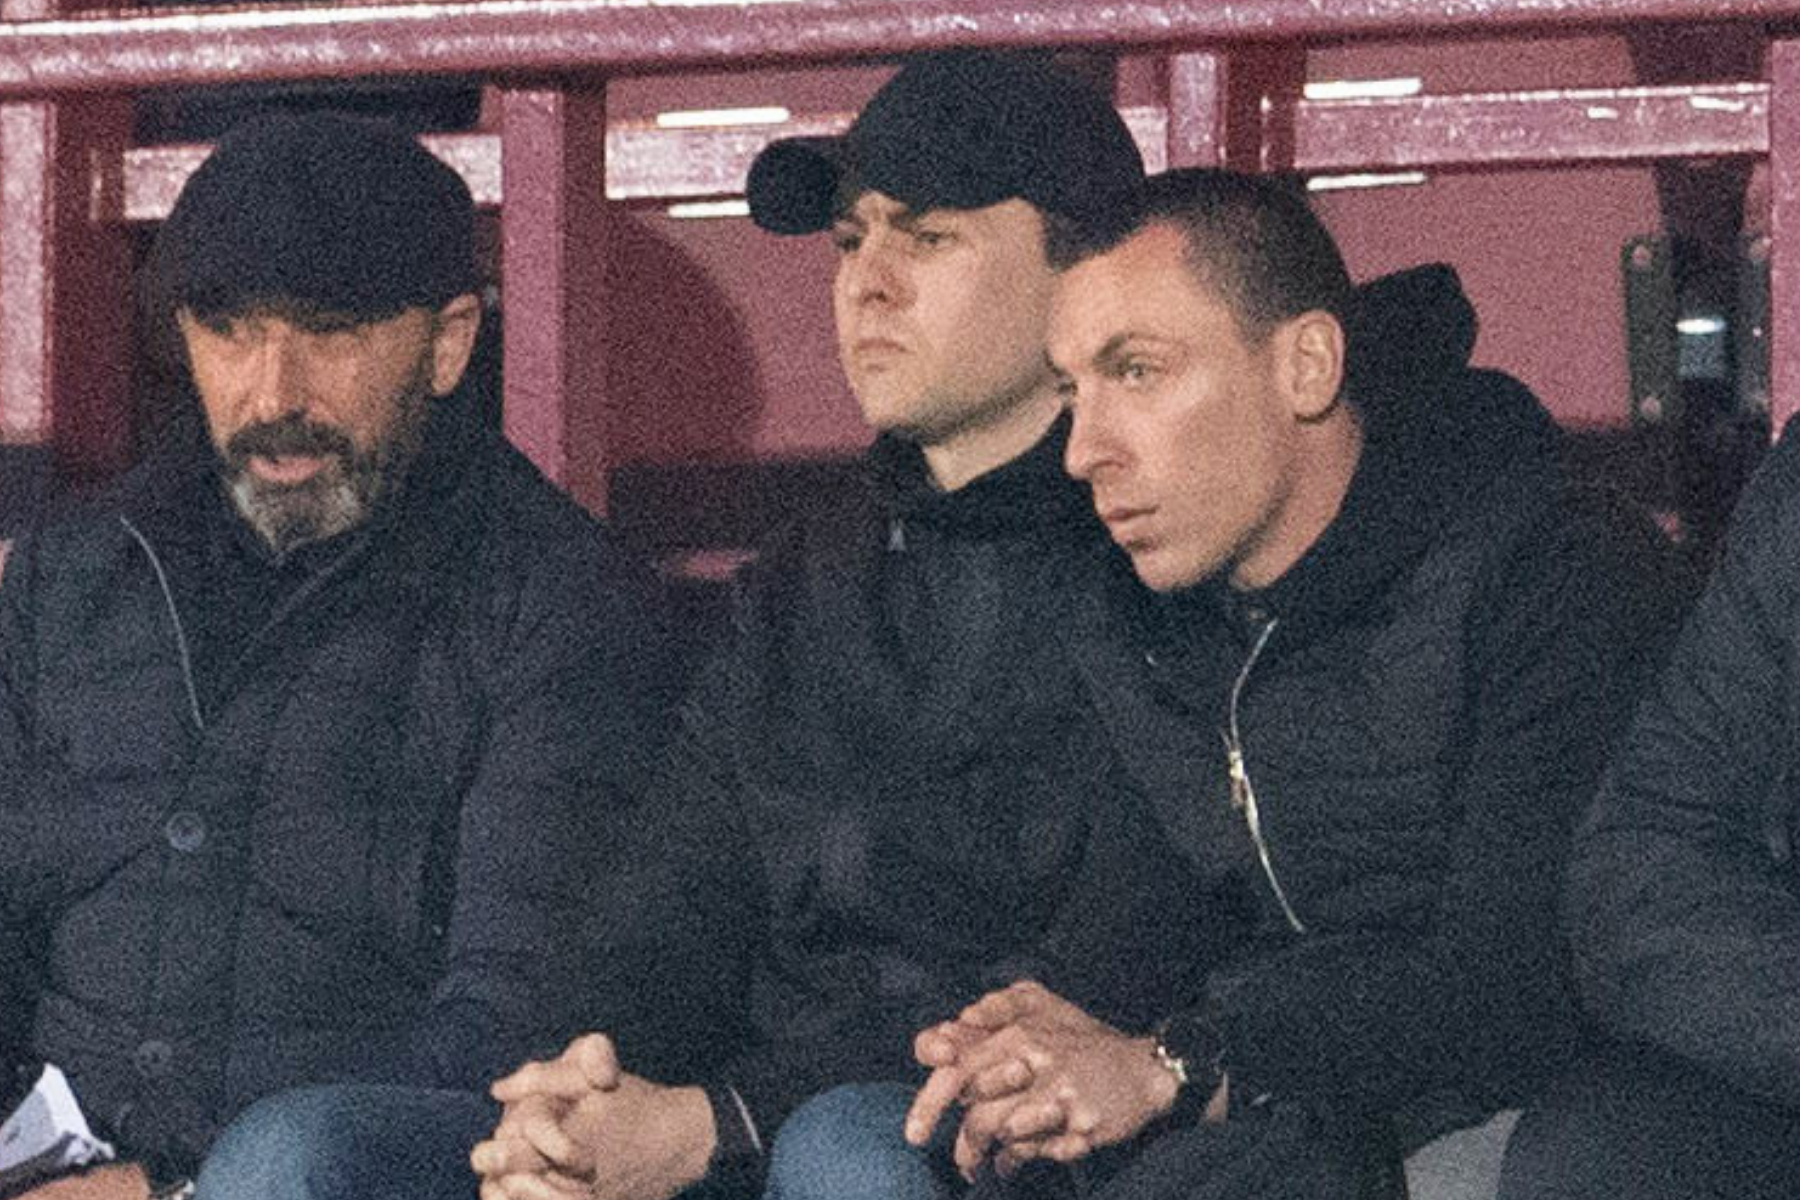 Celtic hero Scott Brown spotted at Dunfermline game